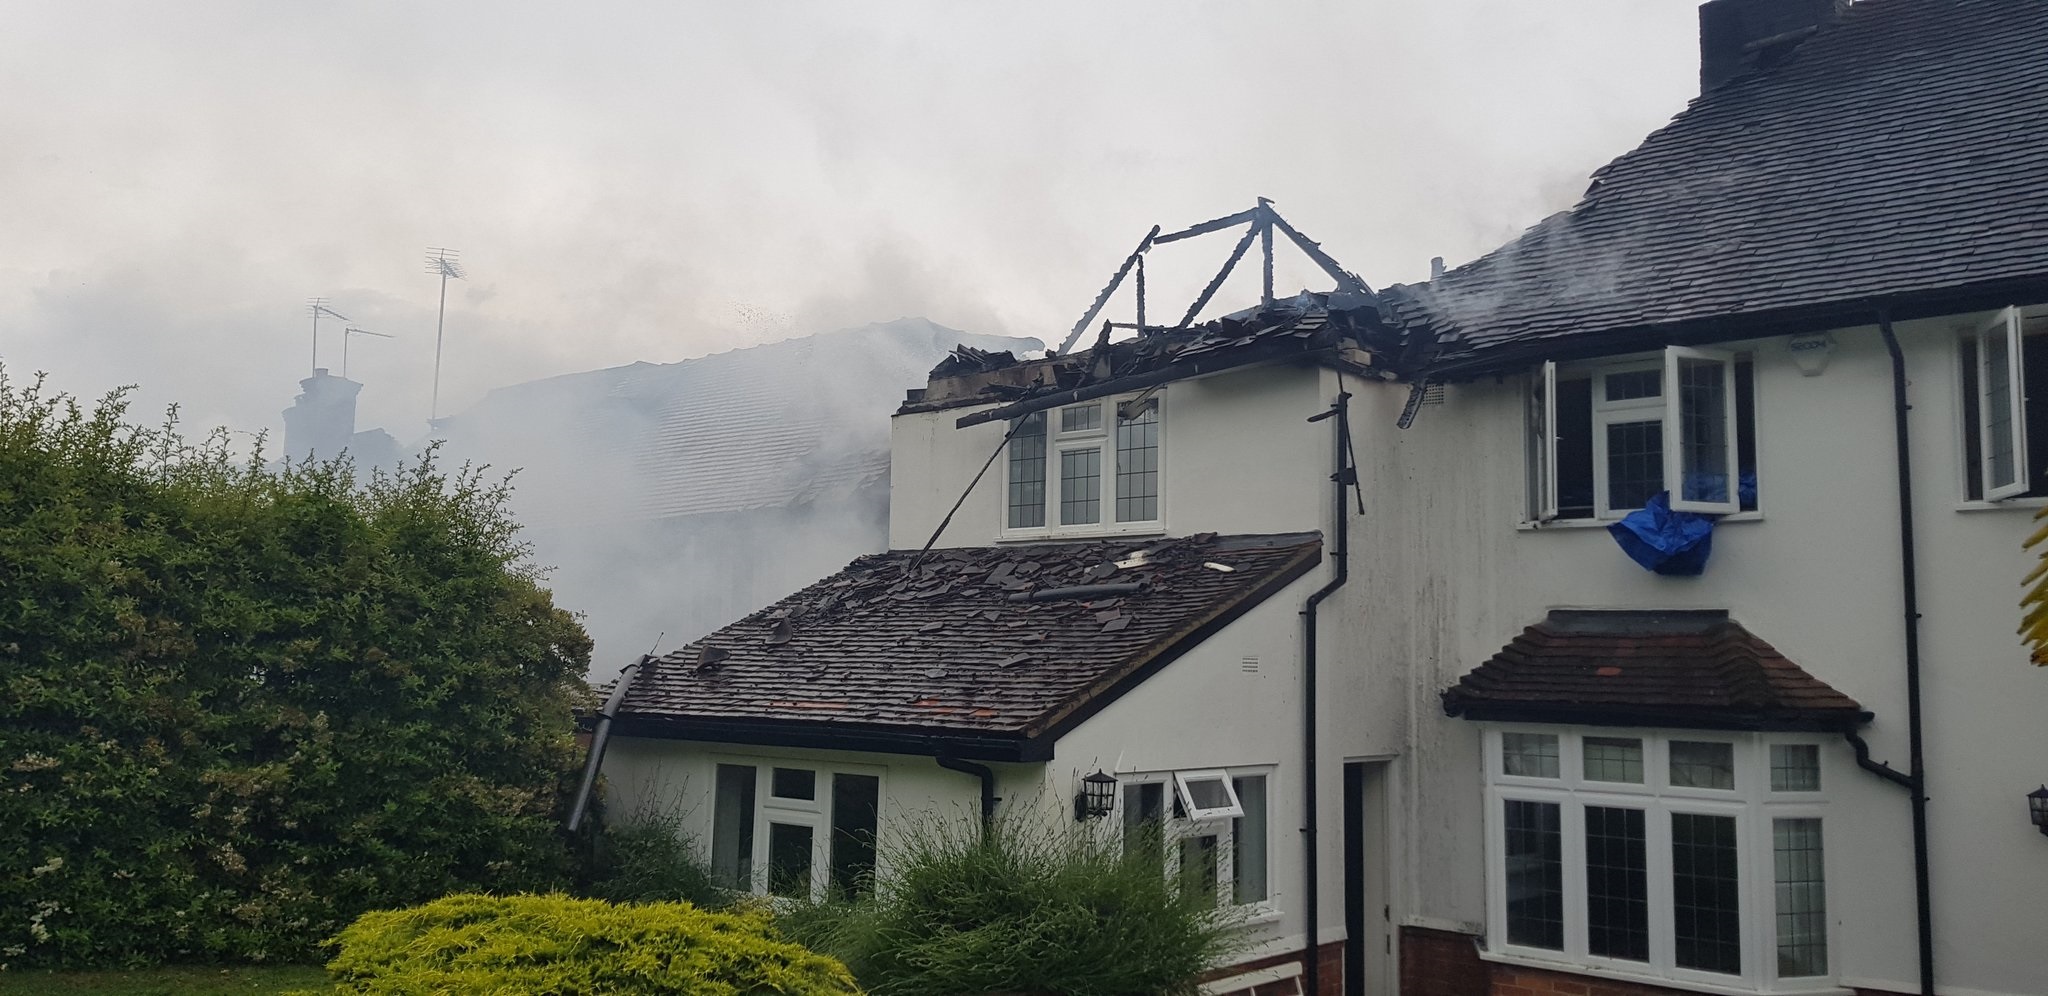 More than 60 firefighters called to blaze in South Croydon